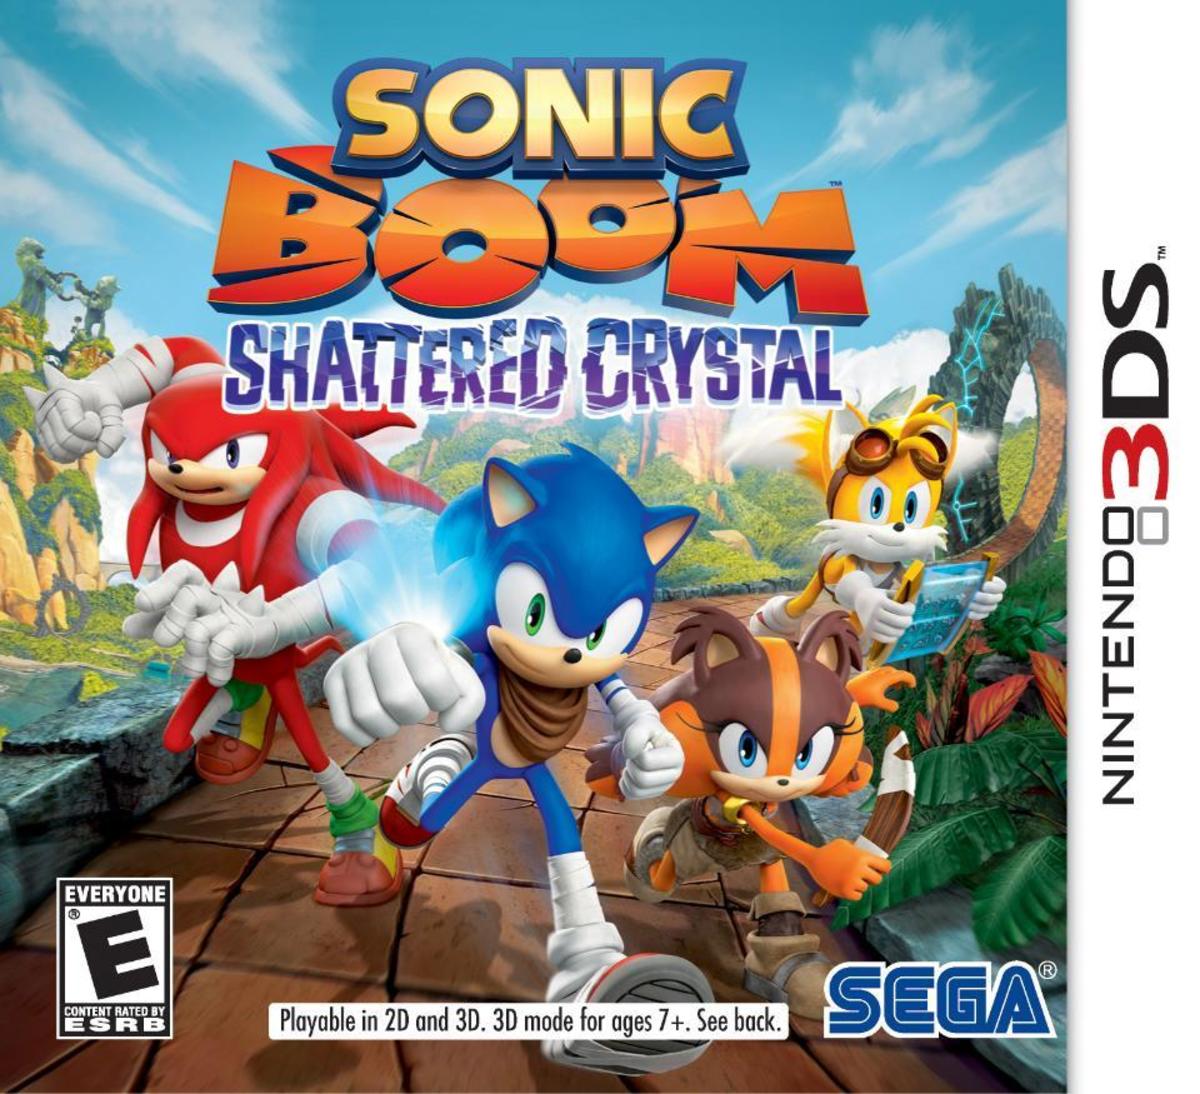 "Sonic Boom: Rise of Lyric" and "Sonic Boom: Shattered Crystal" Box Art